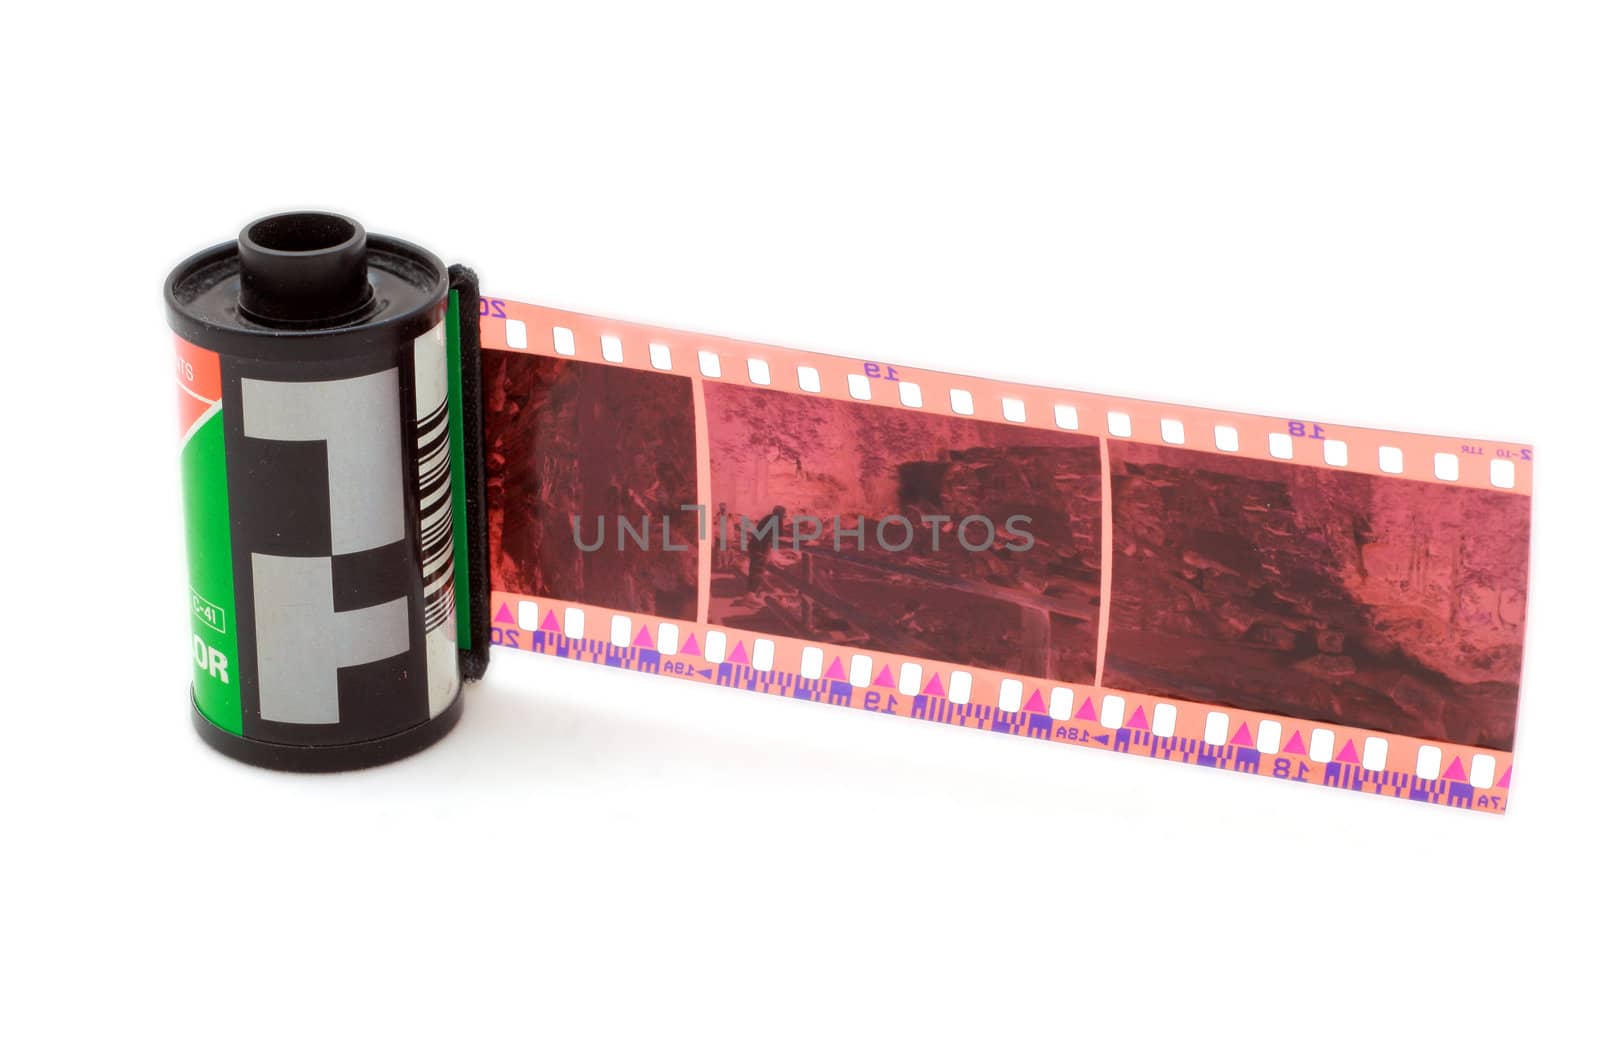 35 mm negative film and roll isolated in white background